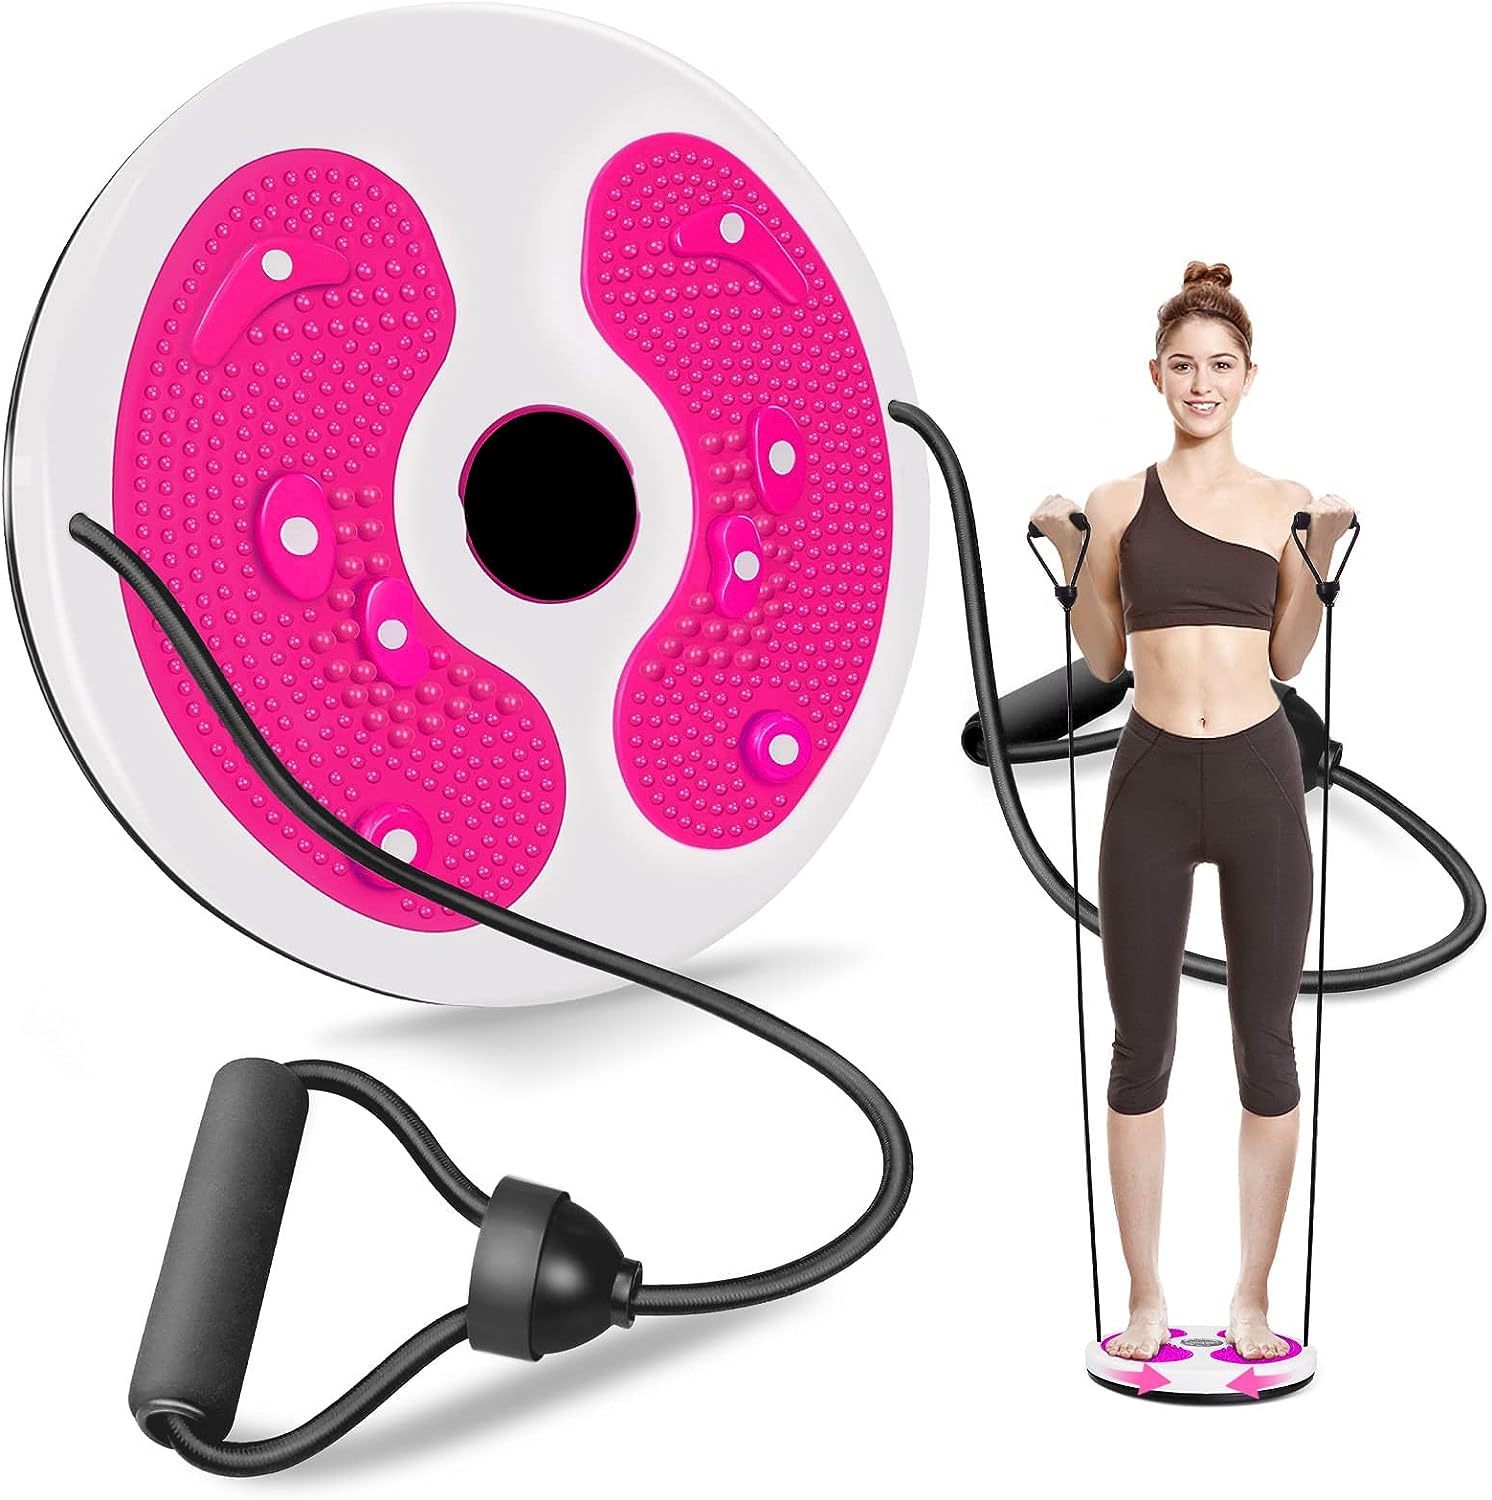 MAIKEHIGH Waist Twist Disc, Waist Slimming Balance Rotating Disc Multi-functional Twist Board Exercise with Massage Foot Sole- Home Fitness Gym Equipment